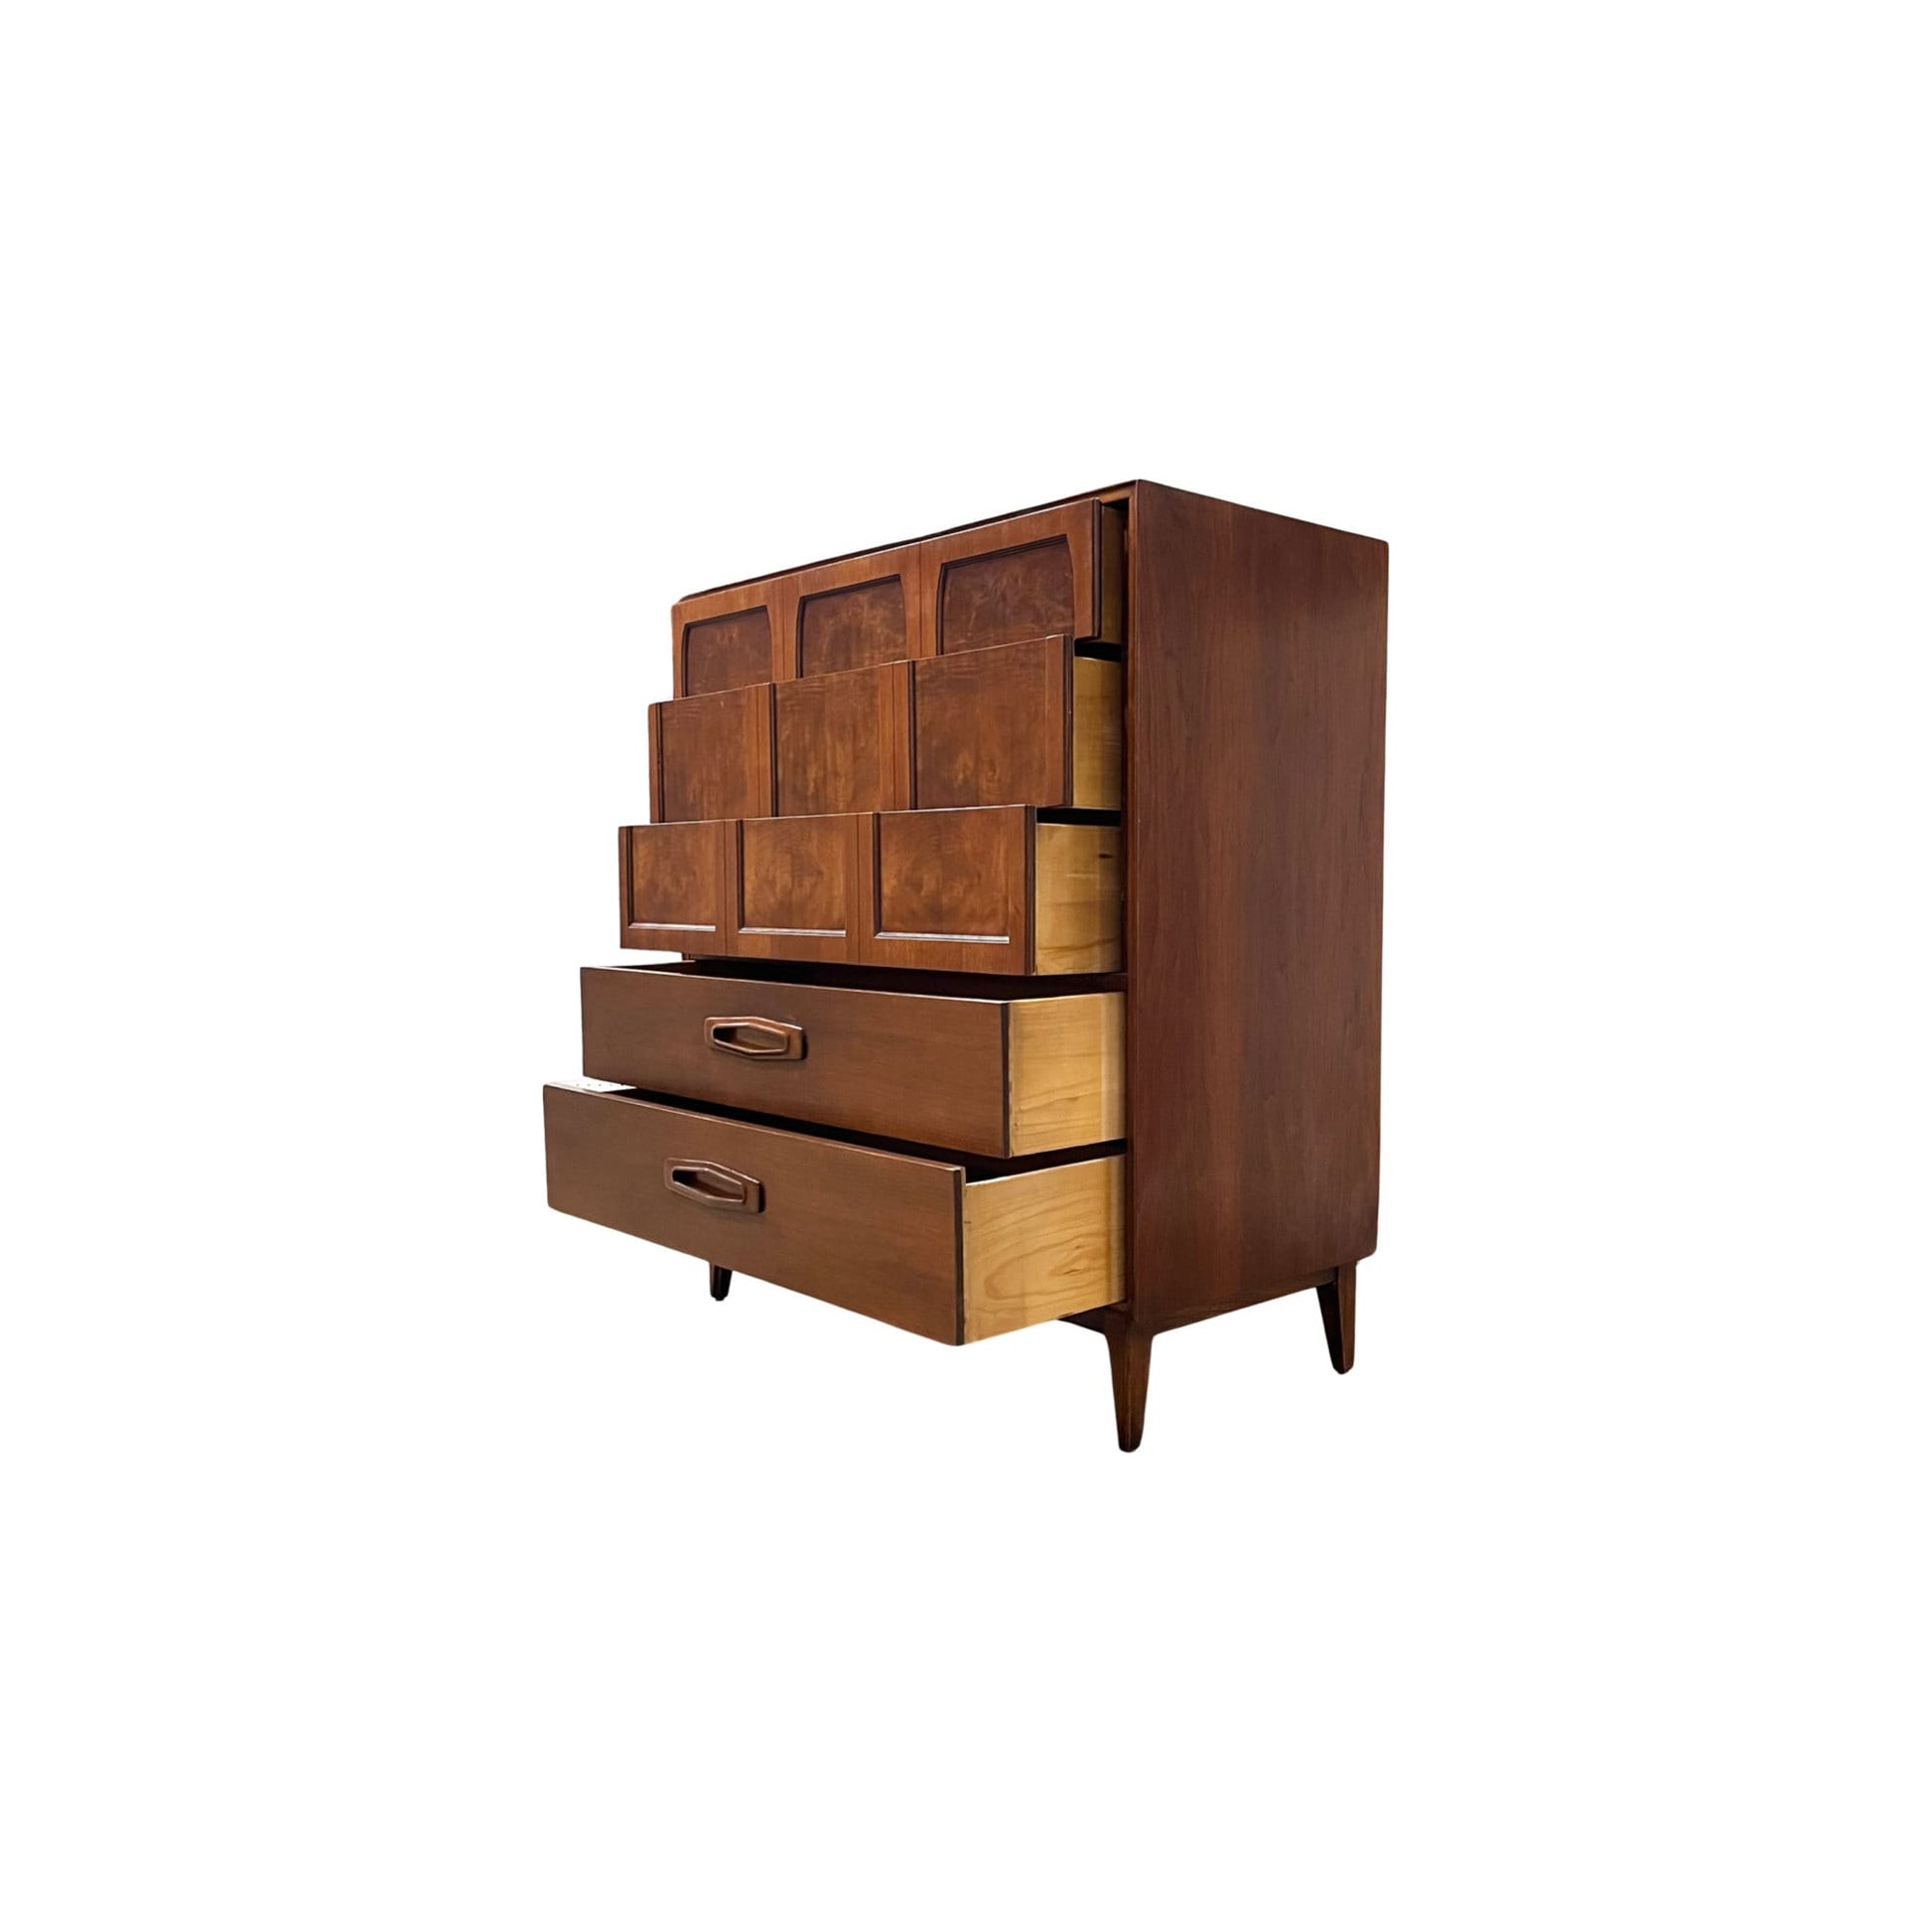 Timeless Mid Century Elegance - Vintage Highboy Dresser by Red Lion Furniture Co. from the 1960s